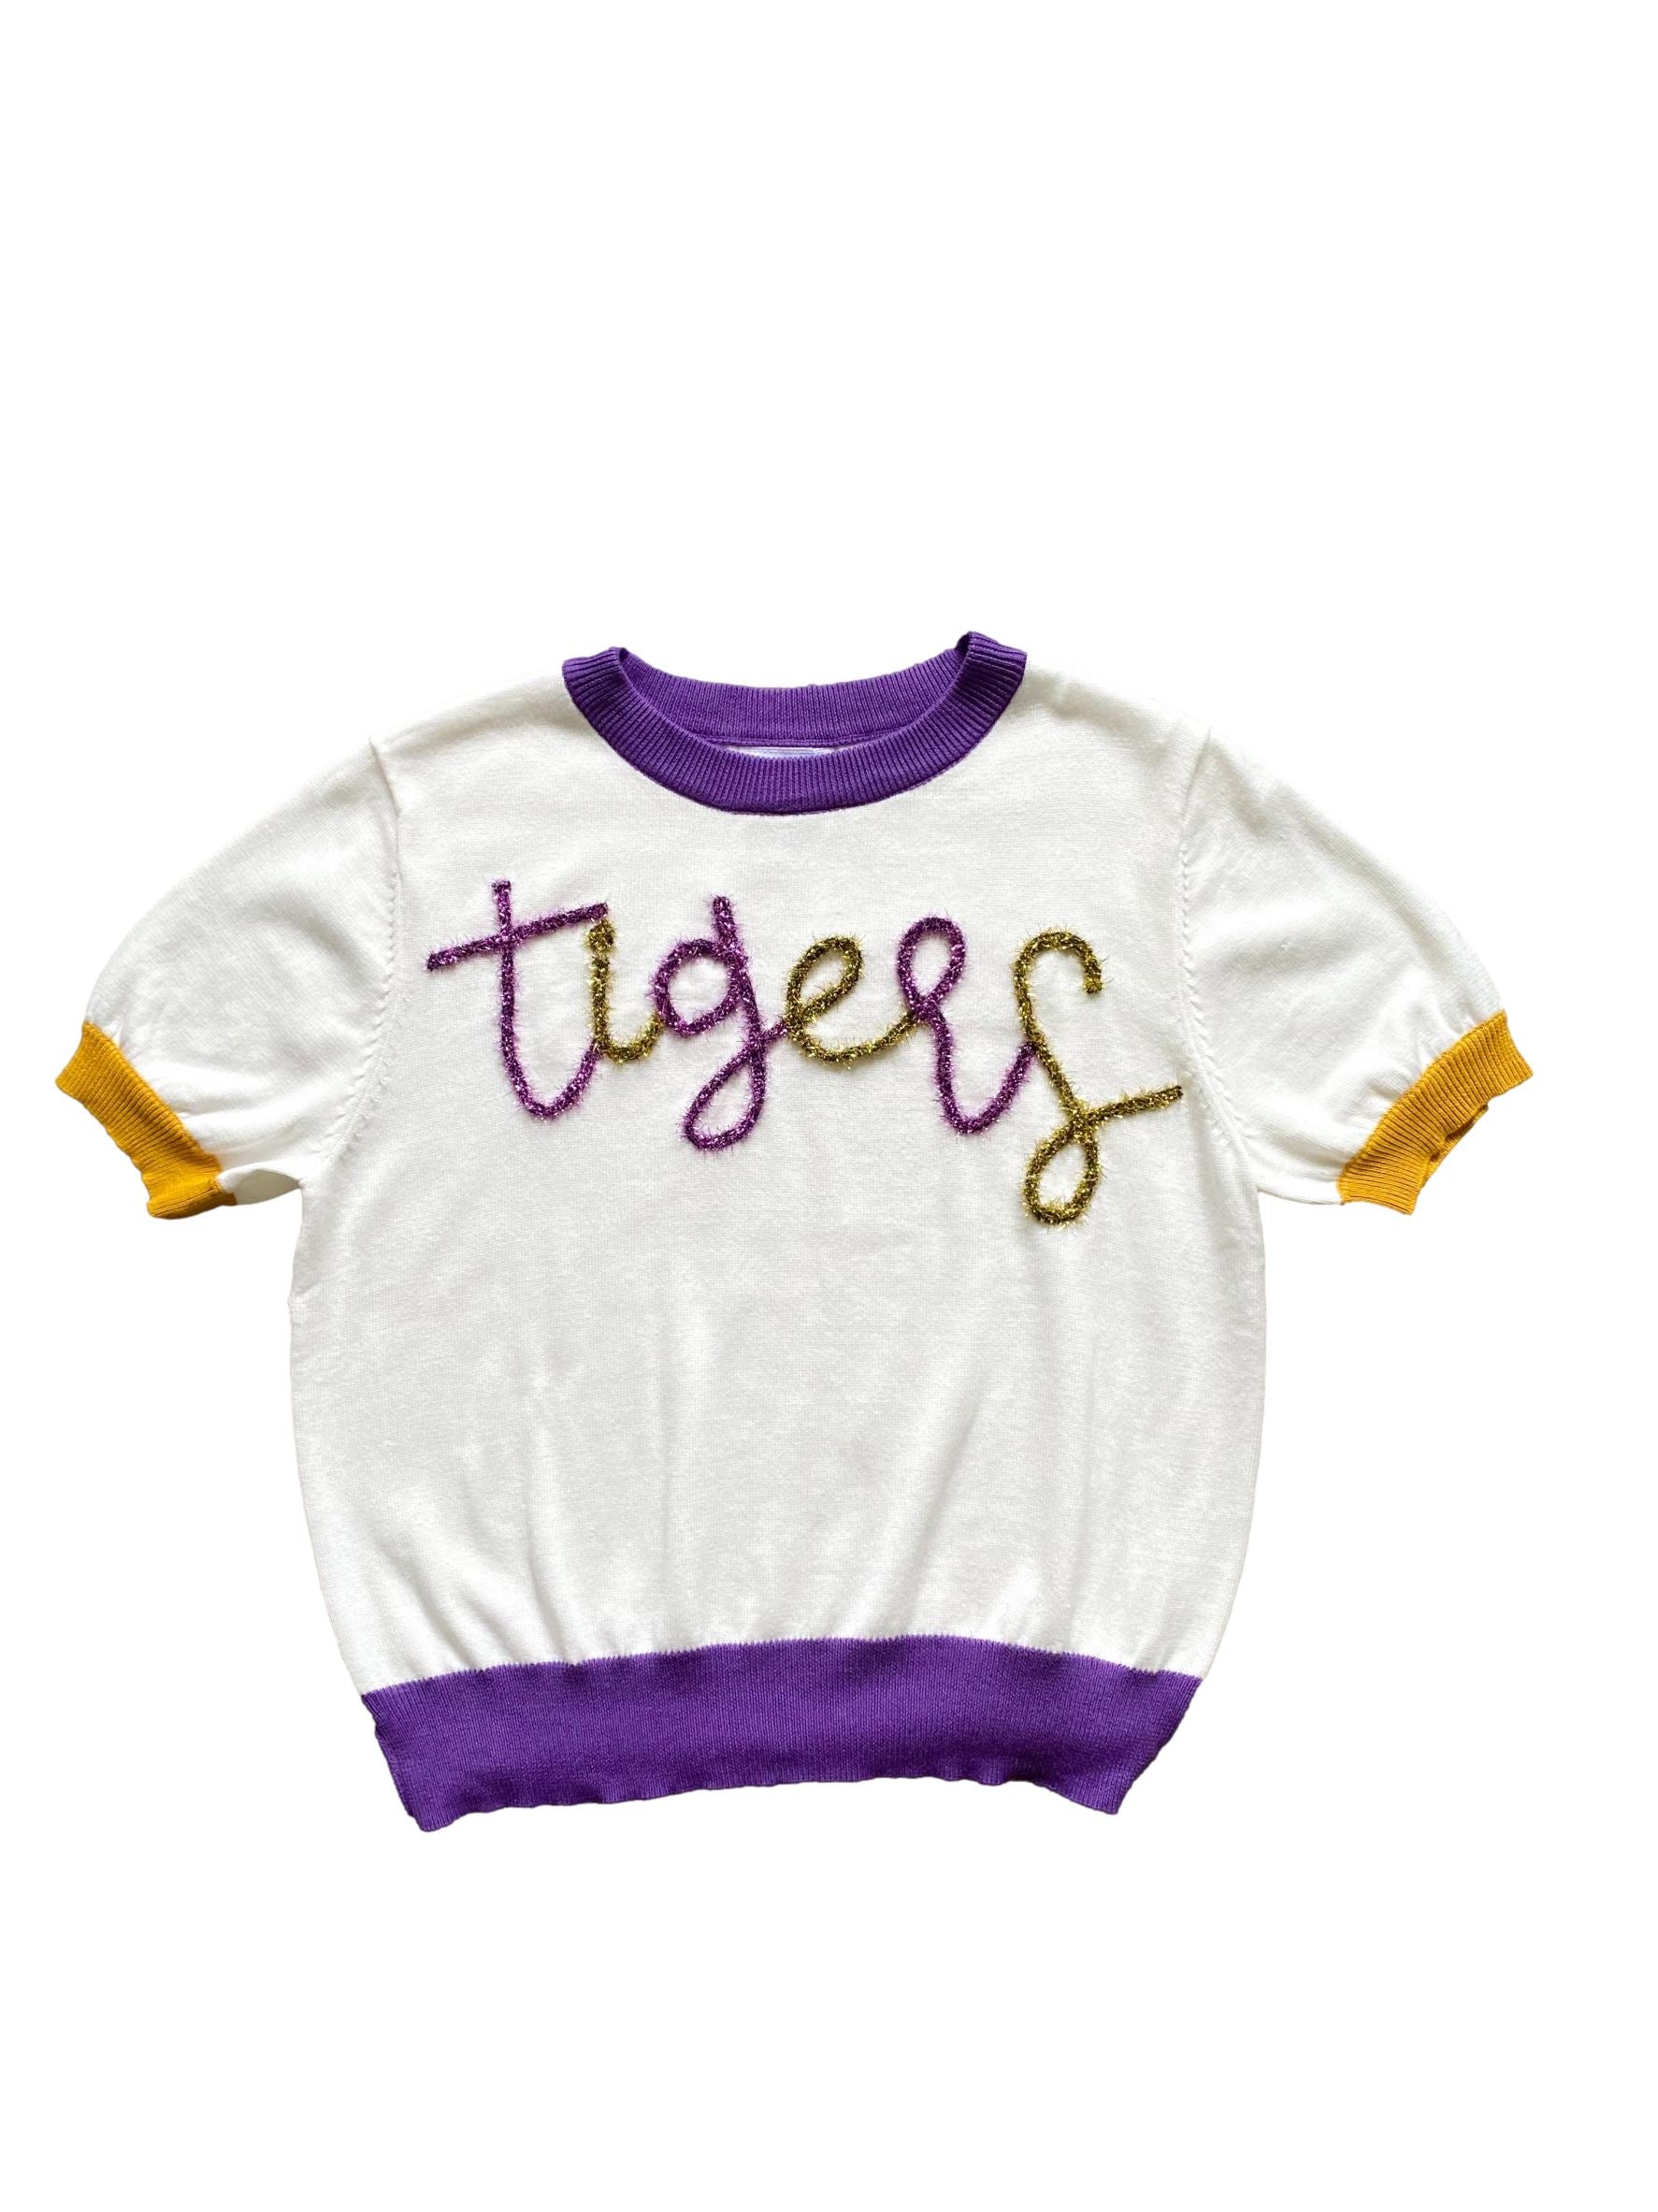 Tigers Short Sleeve Sweater Top Queen of Sparkles 